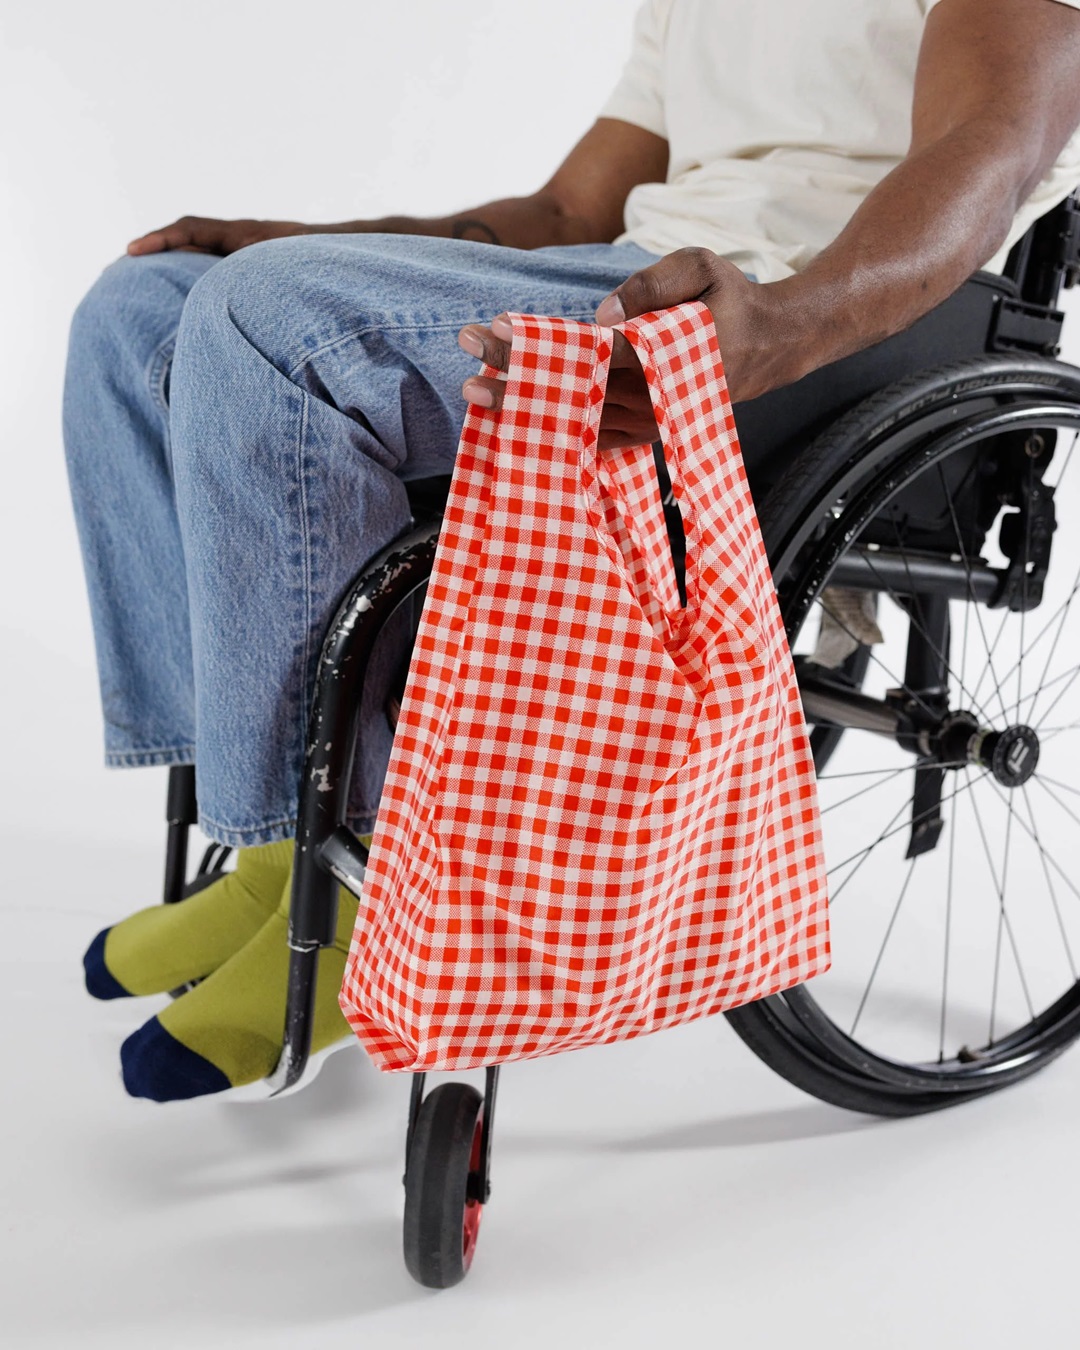 Red gingham bag on wheelchair